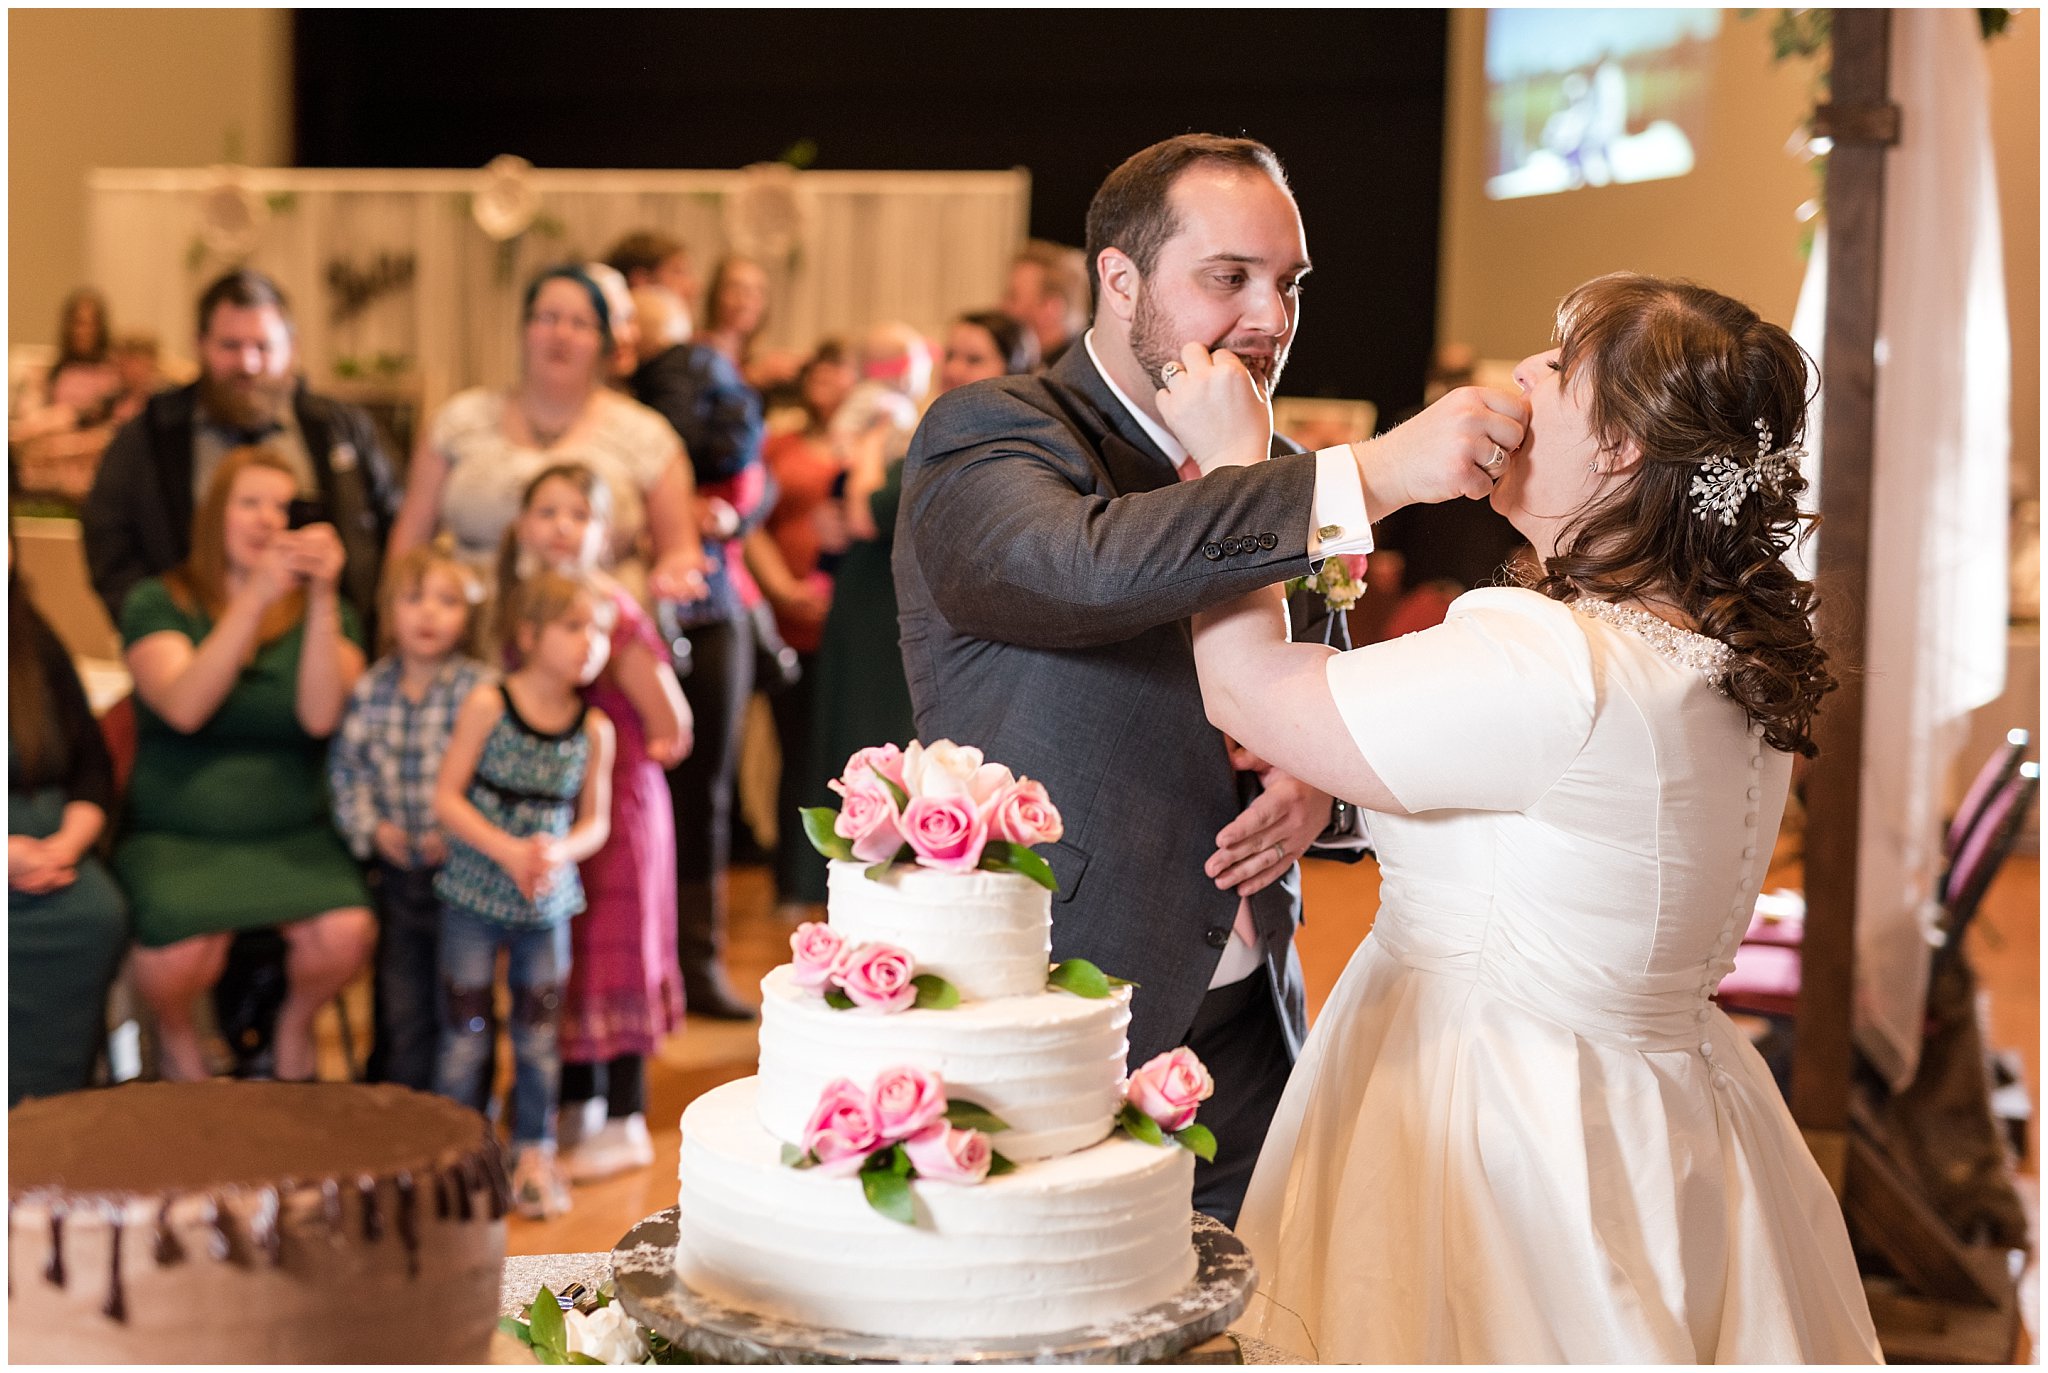 Cake cutting during reception | Ogden Temple Wedding | Jessie and Dallin Photography